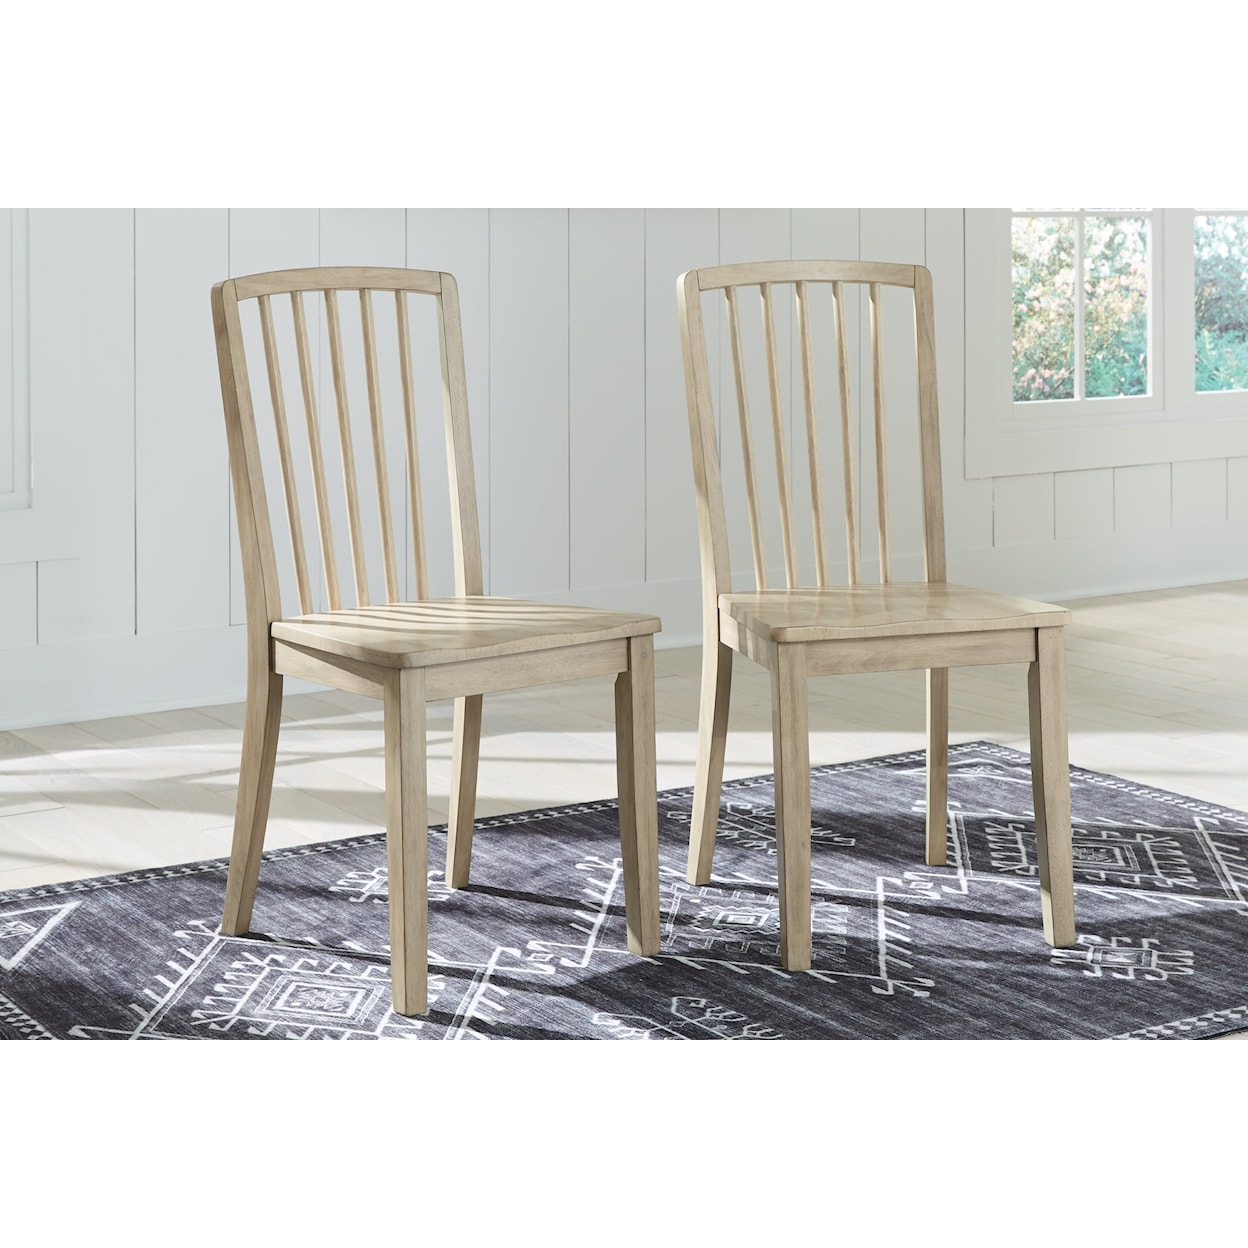 Signature Design by Ashley Gleanville 5-Piece Dining Set